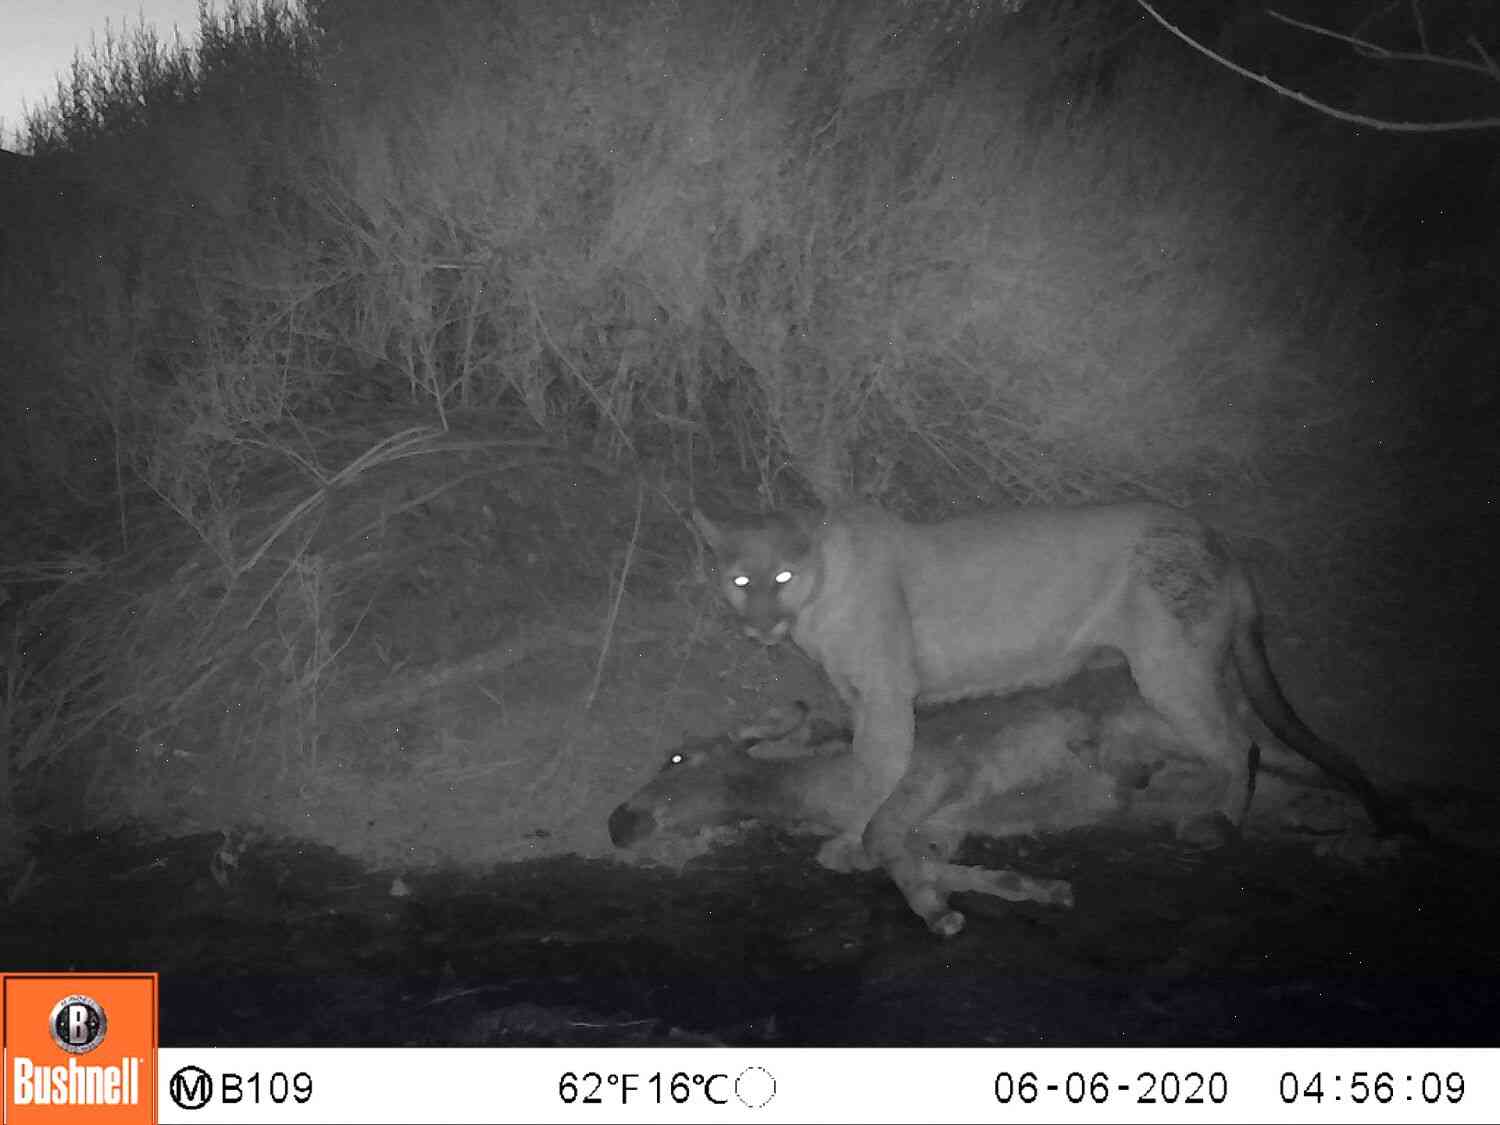 Wild donkeys are thriving, but the mountain lions are not